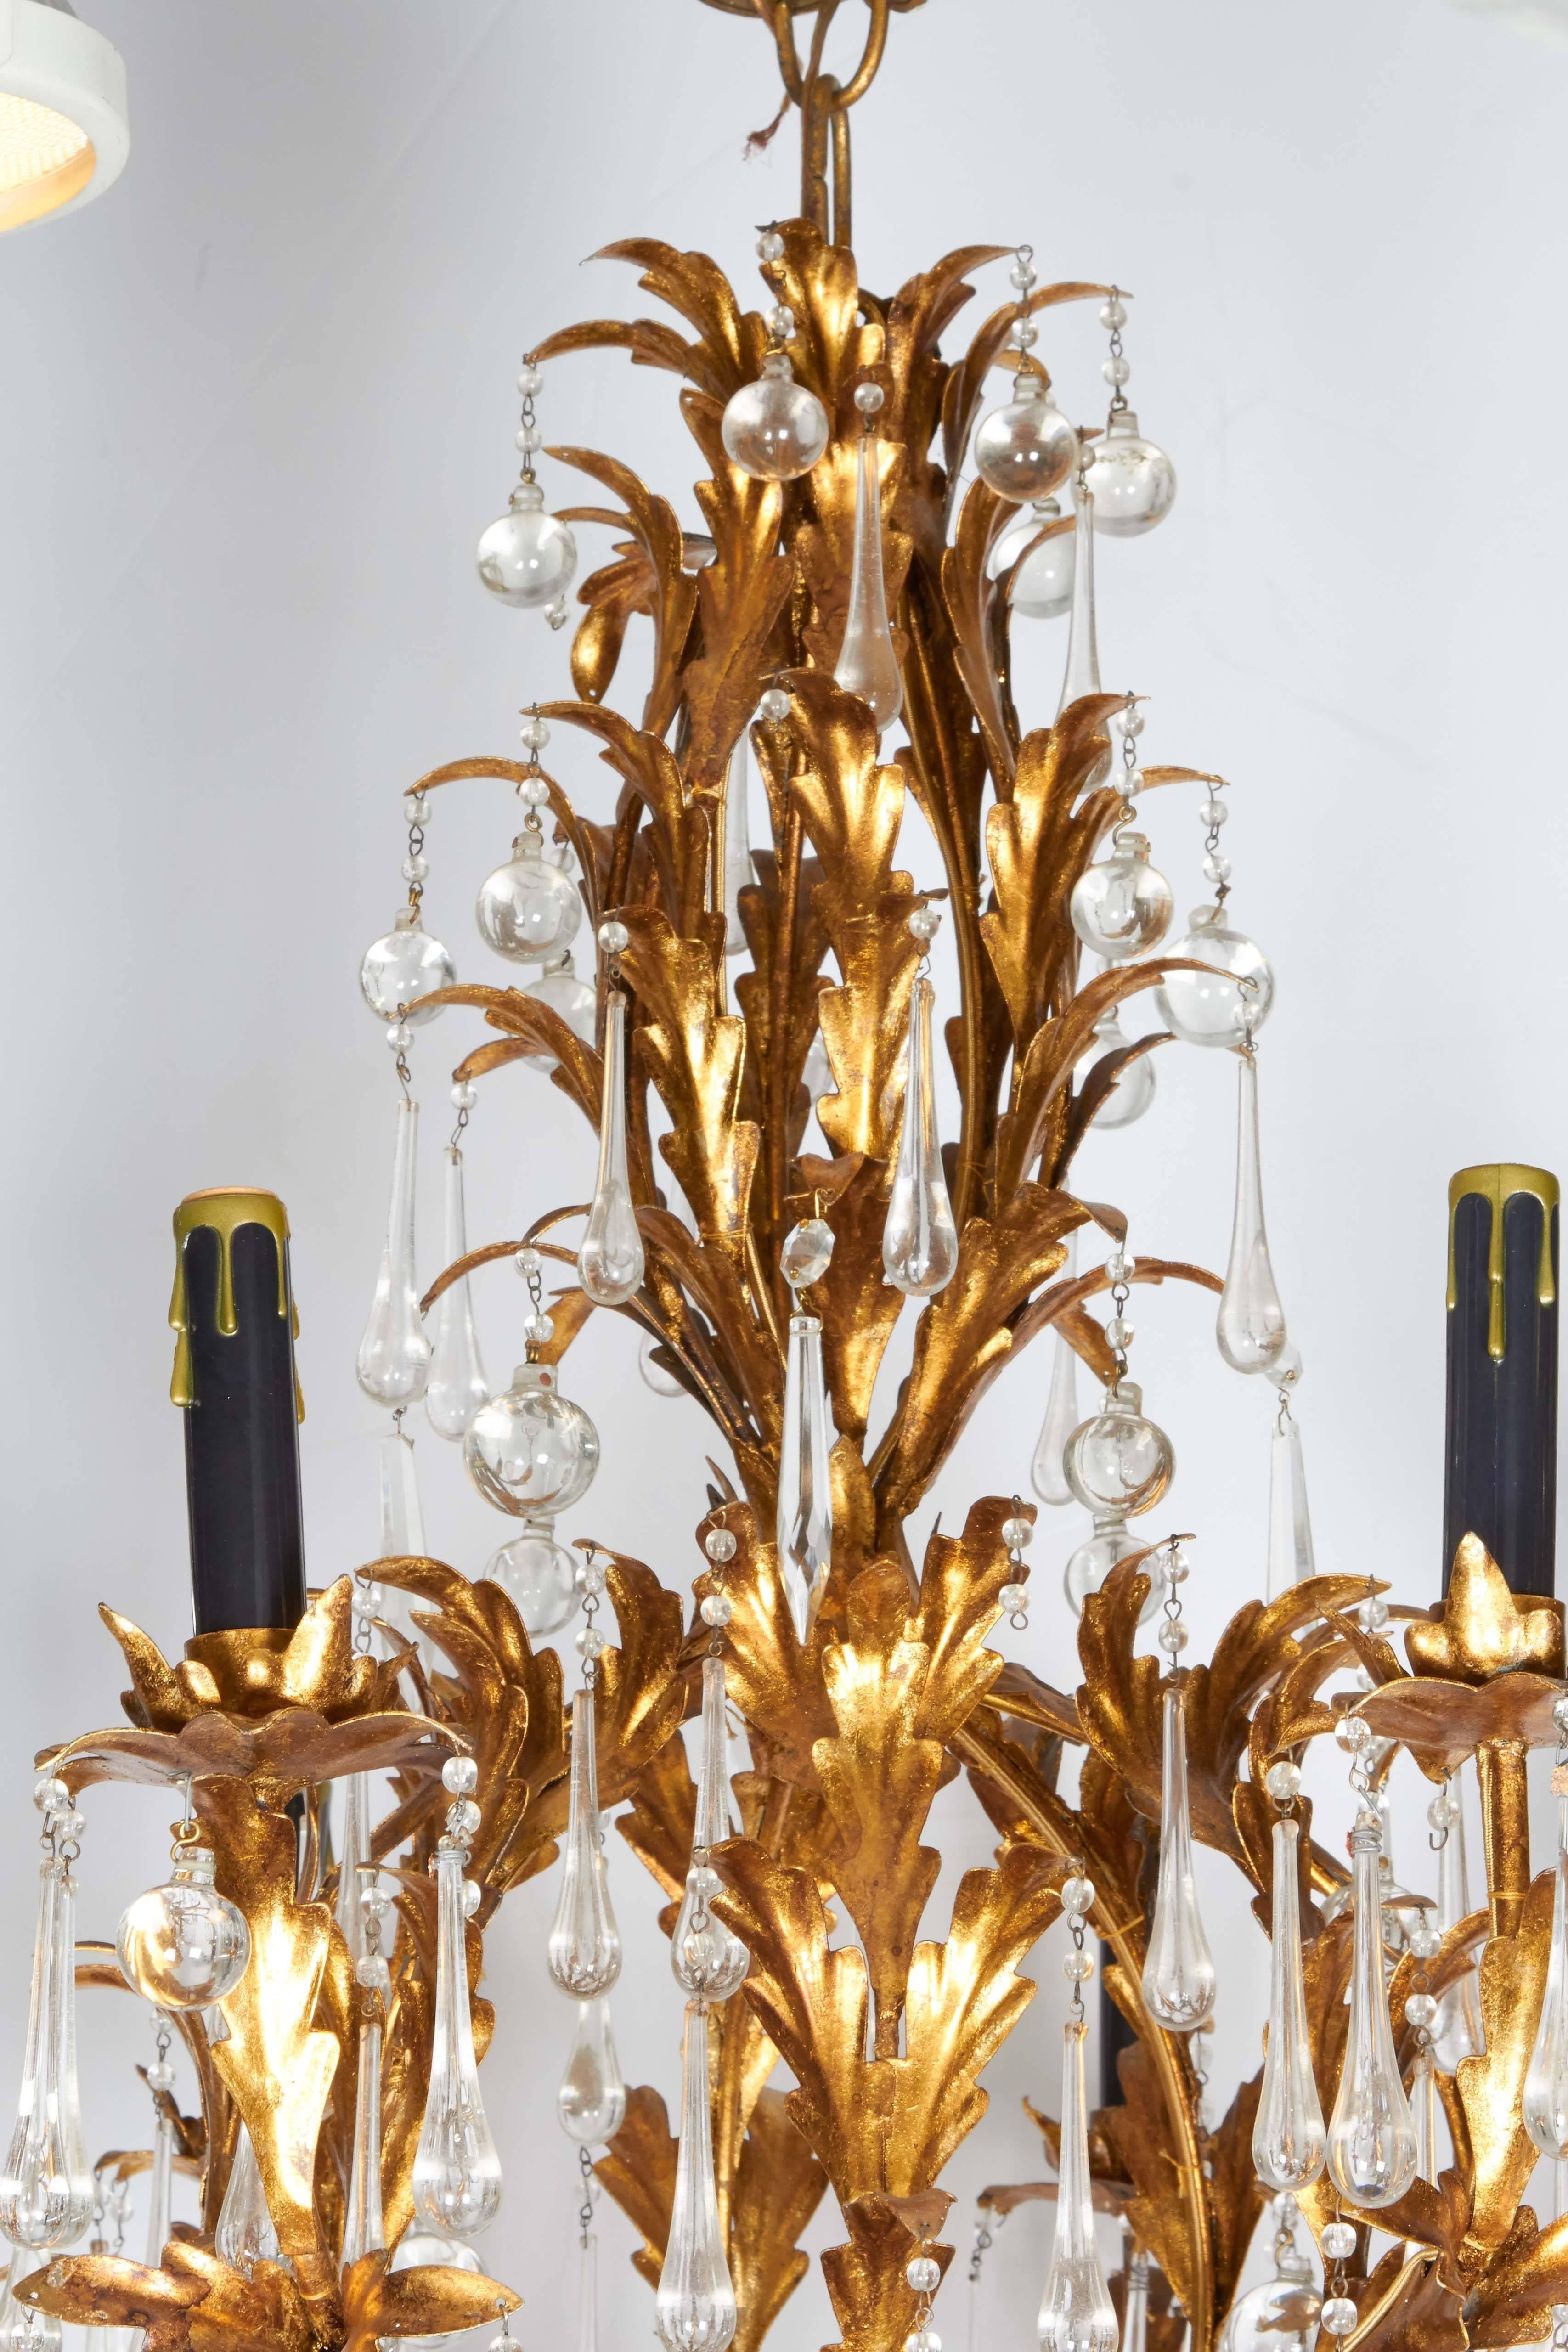 Hollywood Regency Gilt Tole Eight-Light Chandelier with Crystal Drops